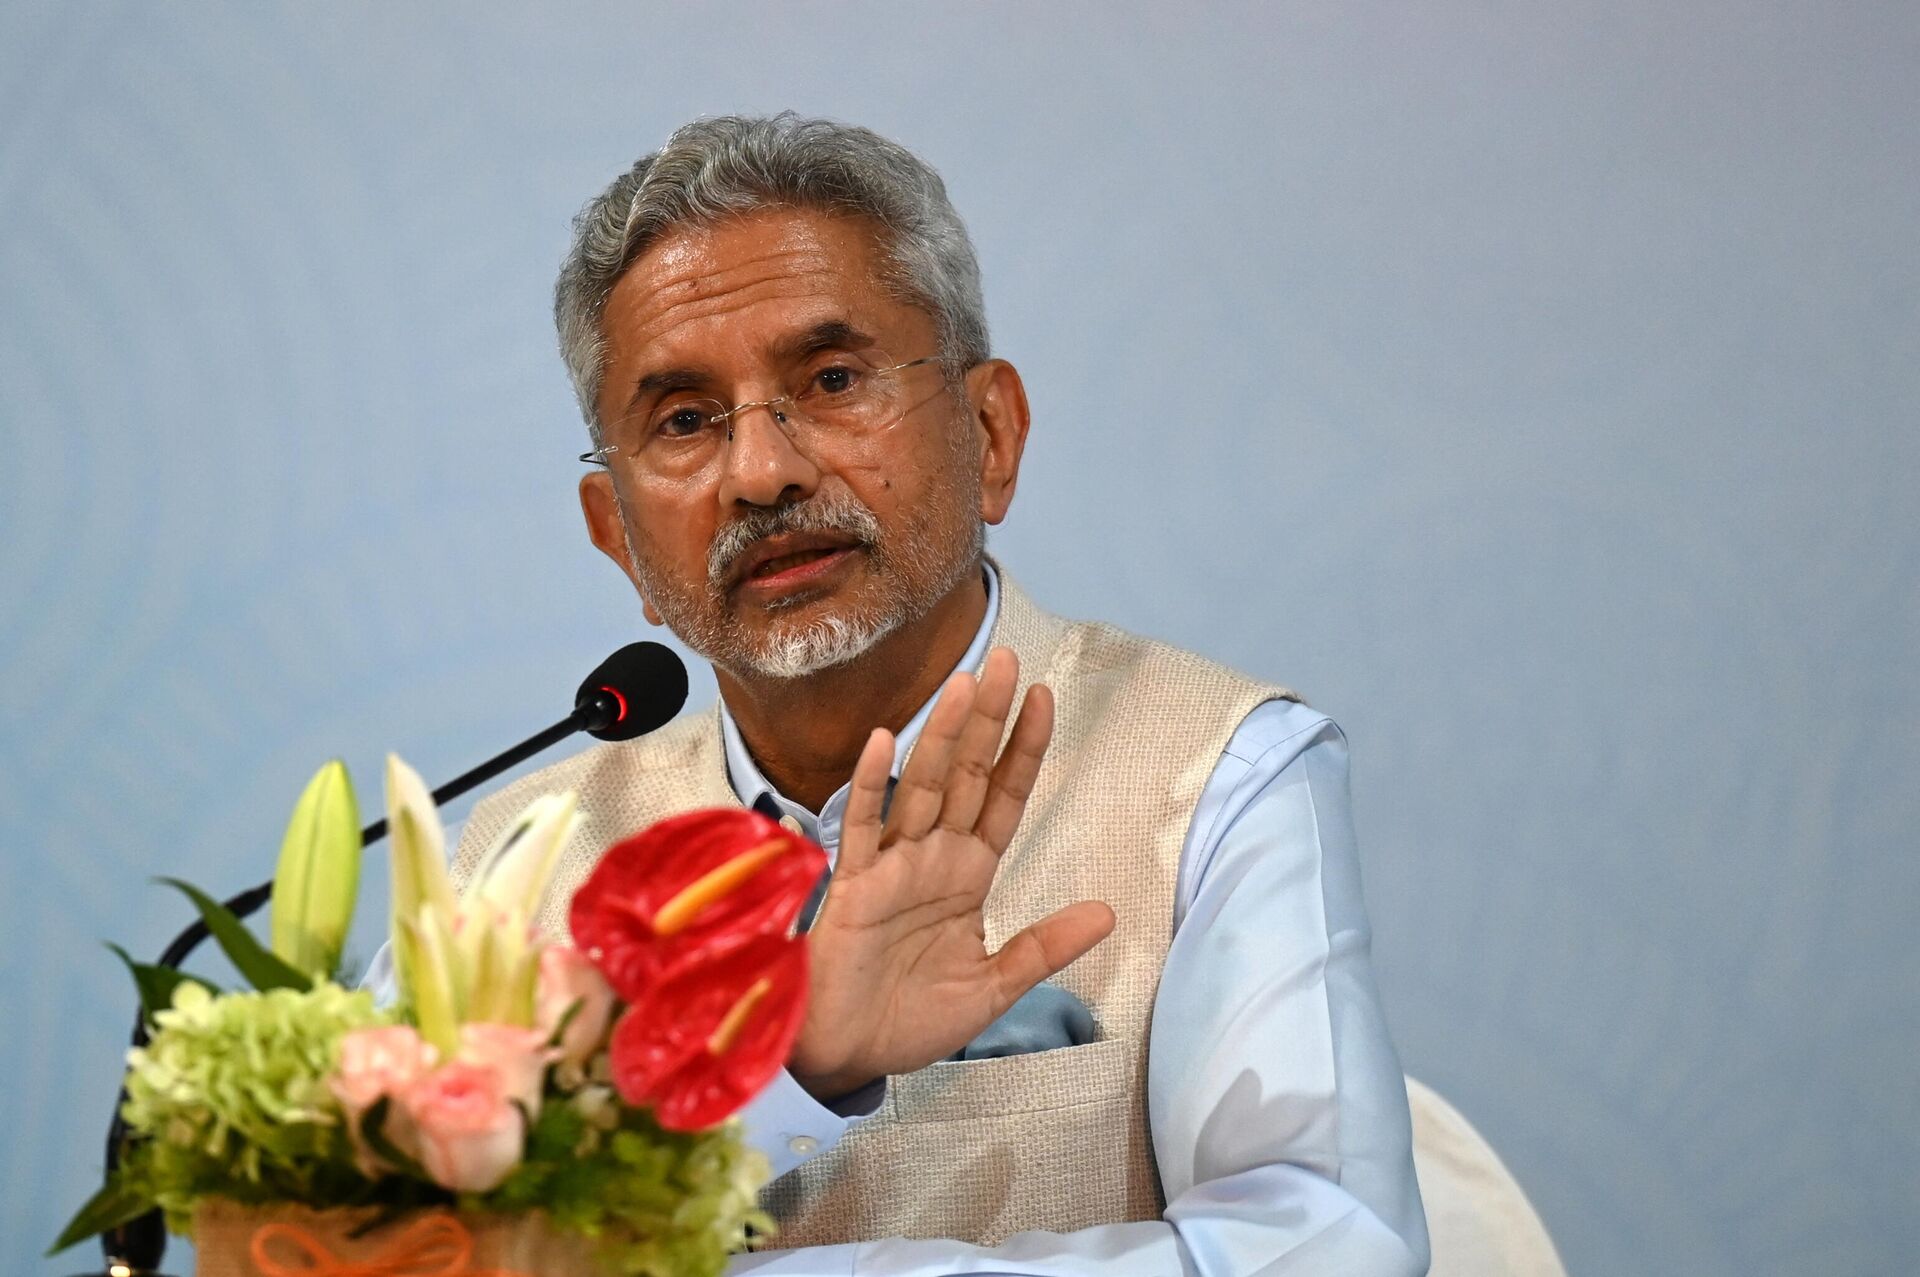 India's Foreign Minister Subrahmanyam Jaishankar gestures as he speaks during a news conference at the media centre for the Shanghai Cooperation Organization (SCO) meeting in Benaulim on May 5, 2023. (Photo by Punit PARANJPE / AFP) - Sputnik India, 1920, 07.12.2023